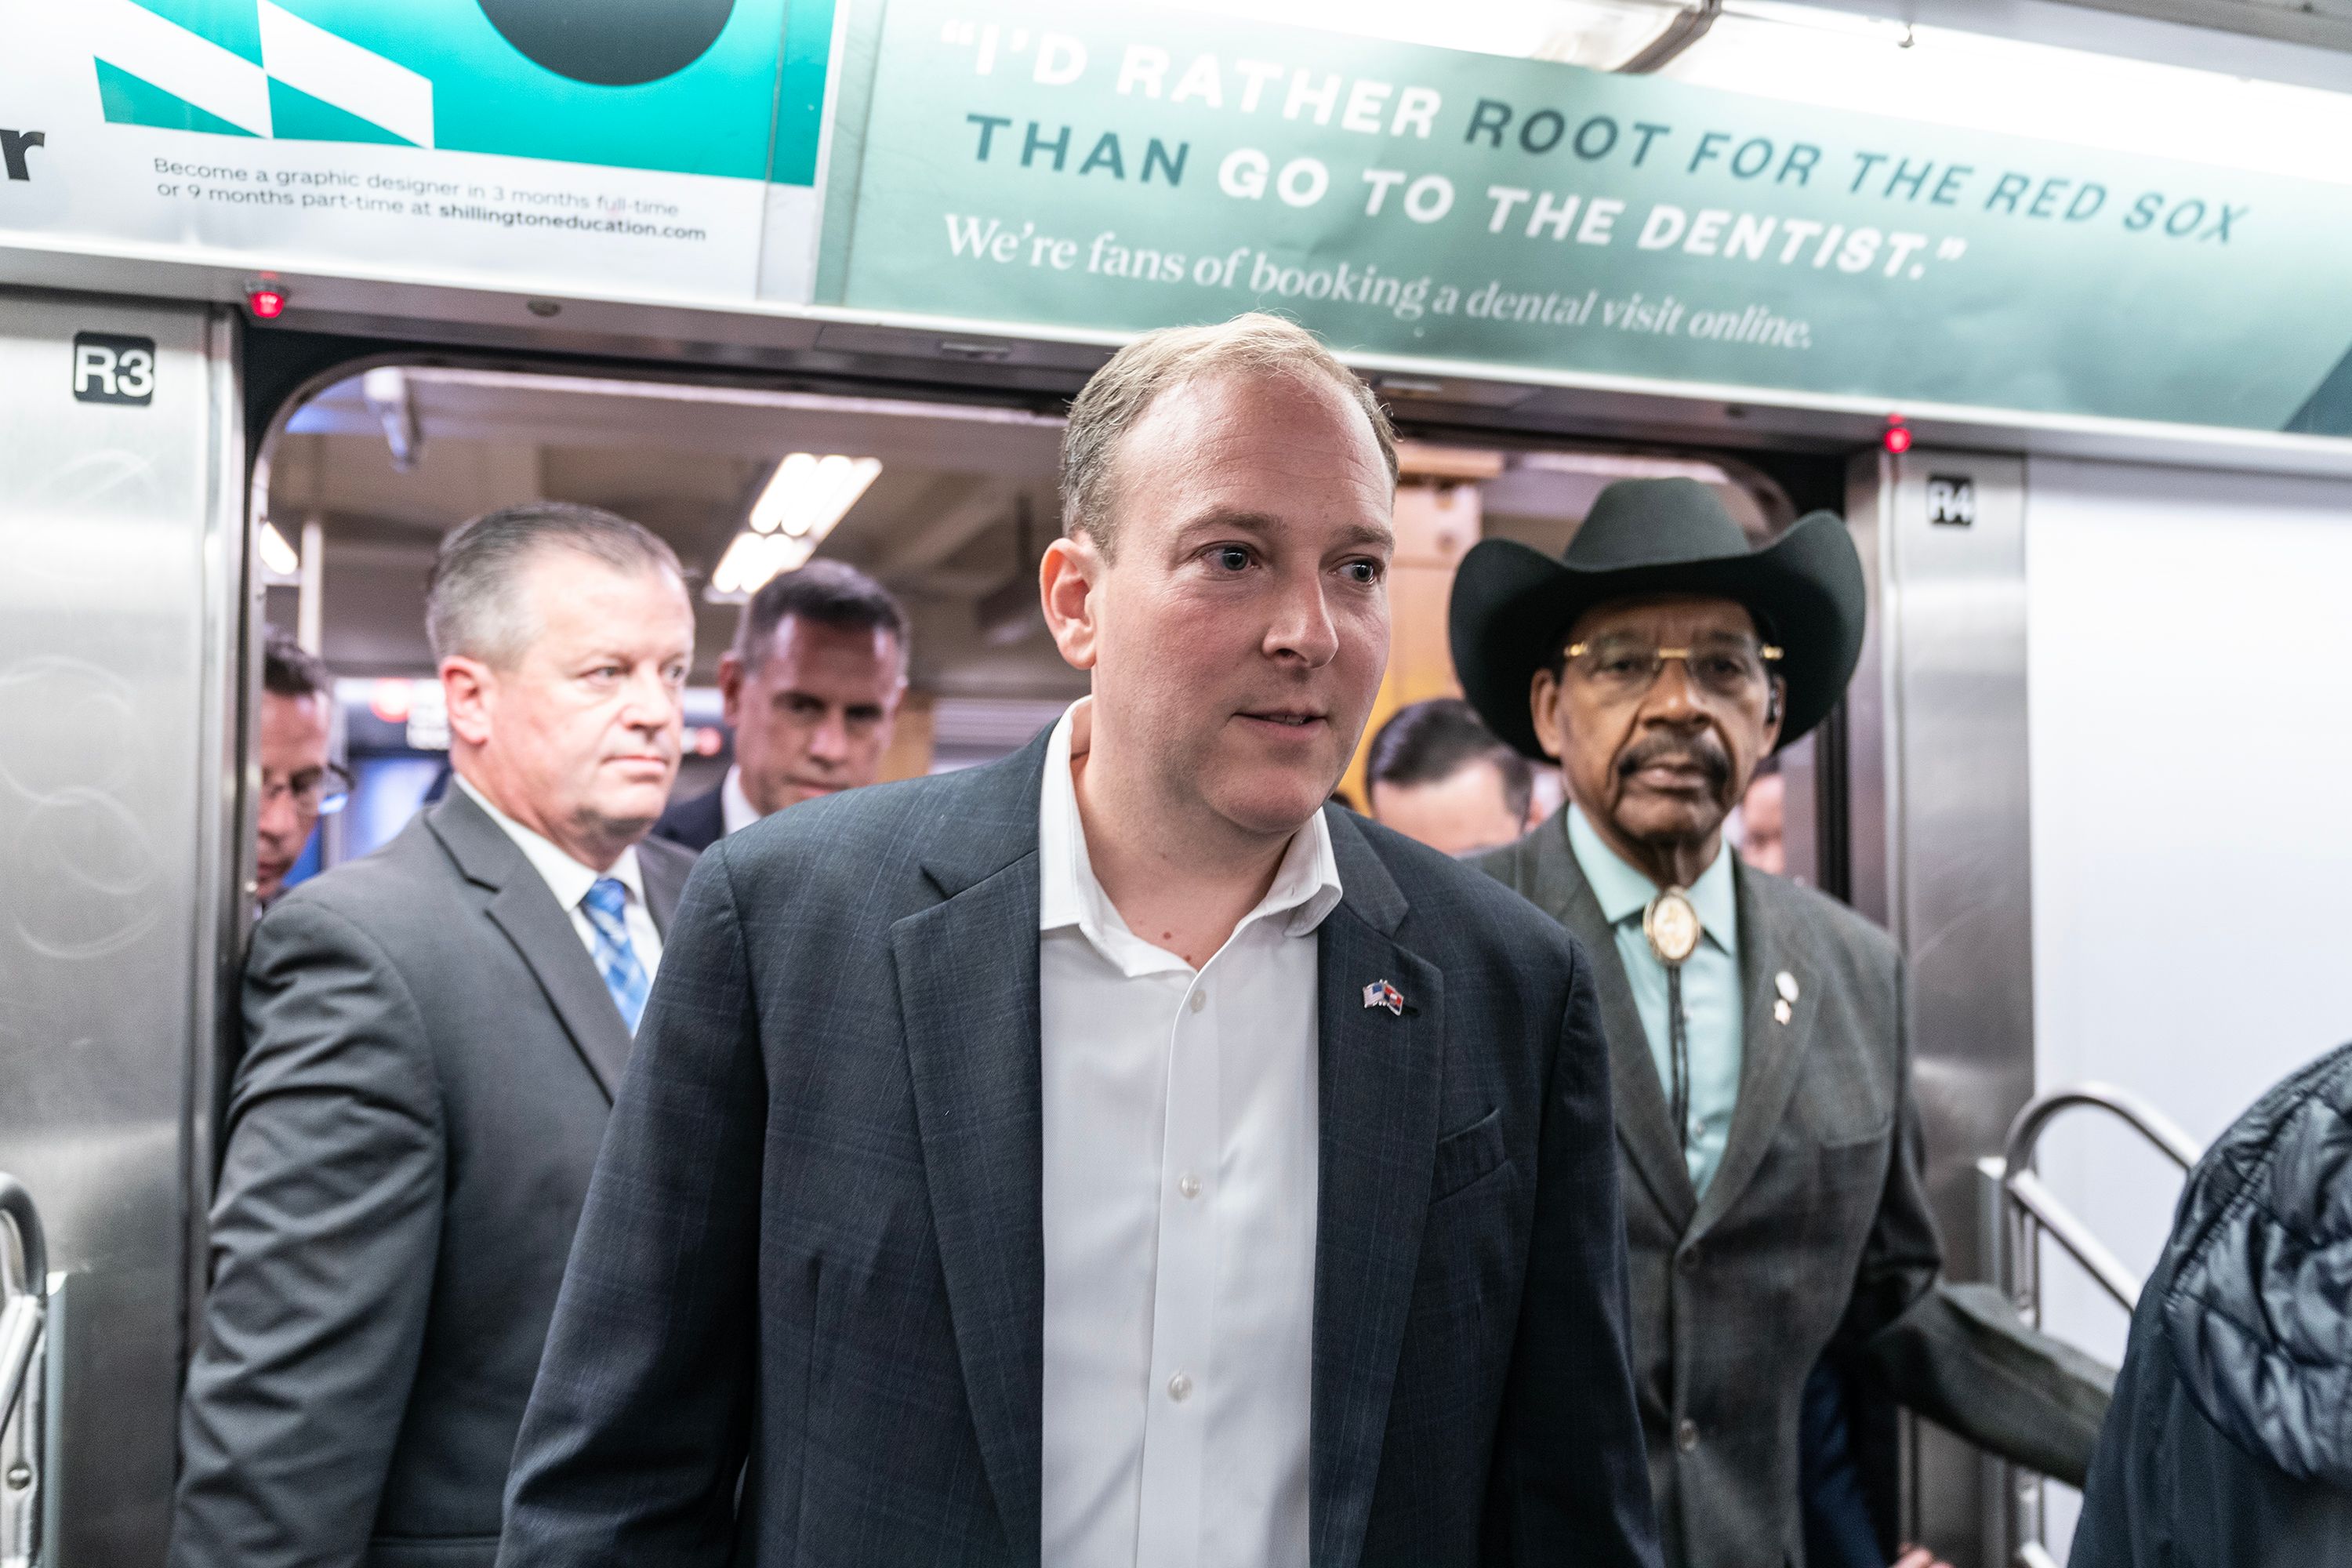 Rep. Lee Zeldin, candidate from Republican Party for governor on general election, rides subway to debates with incumbent Kathy Hochul. Zeldin speaks to the press while on board the train. The family of a man killed by the NYPD in 2018 wants the image of the man wiped from a recent campaign ad.